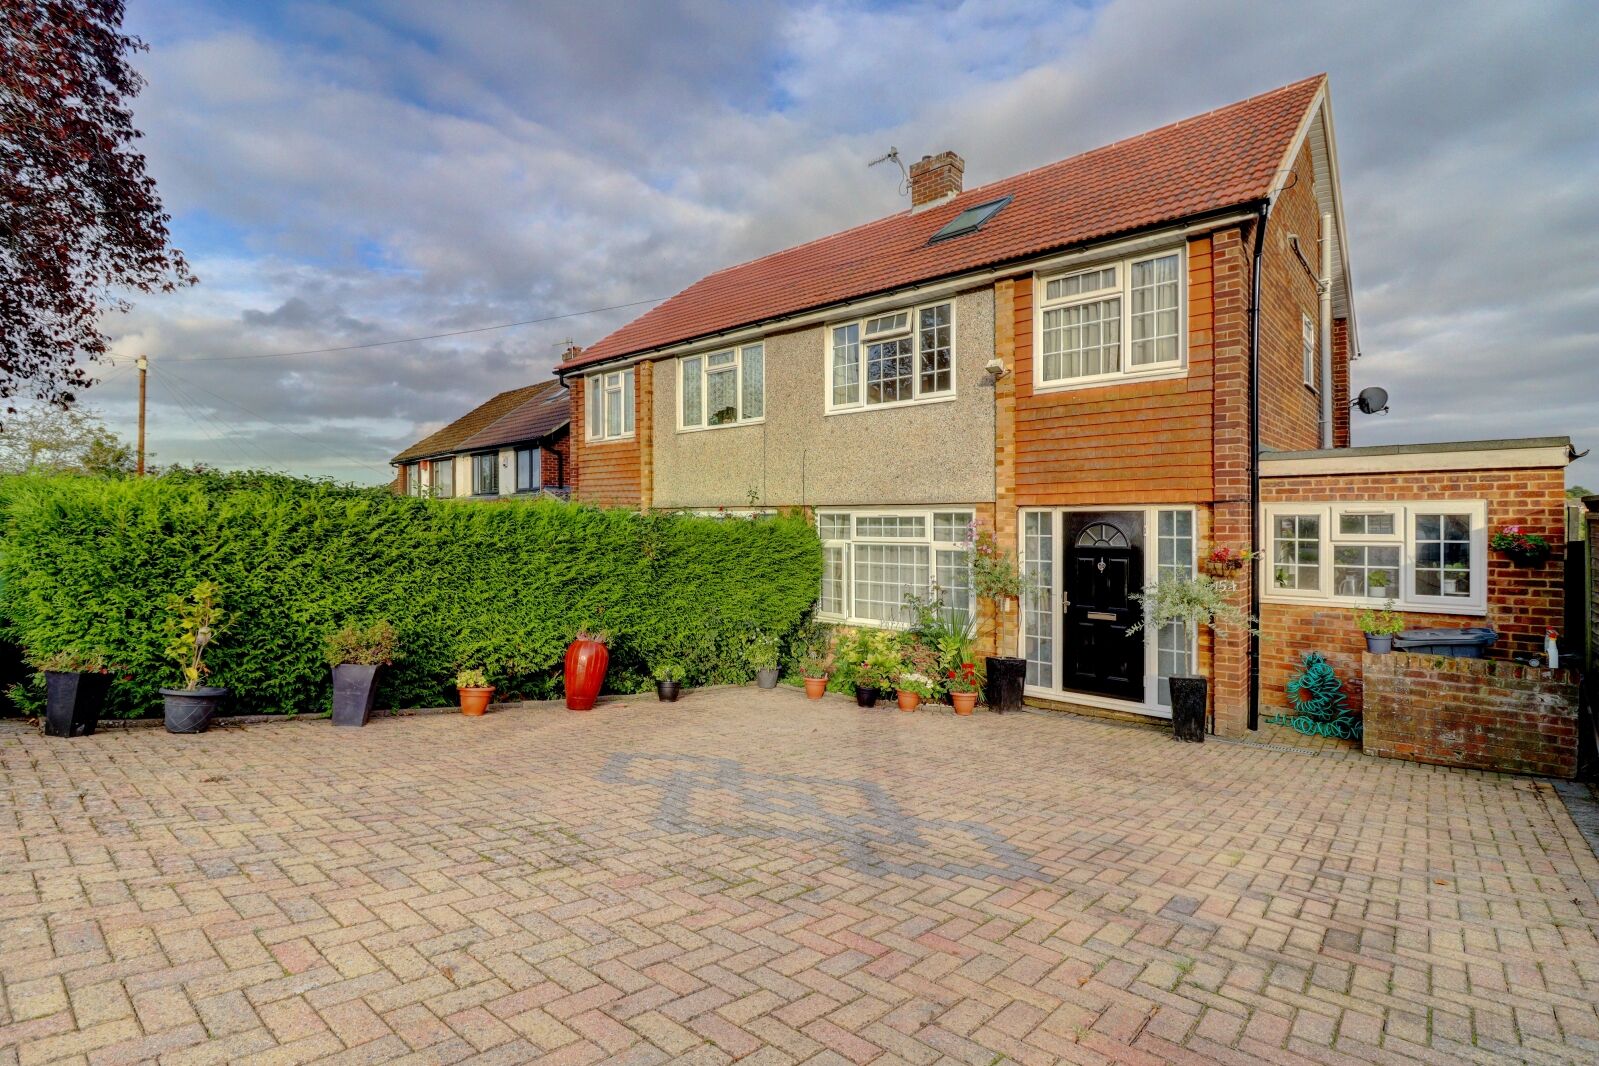 4 bedroom semi detached house for sale Deeds Grove, High Wycombe, HP12, main image